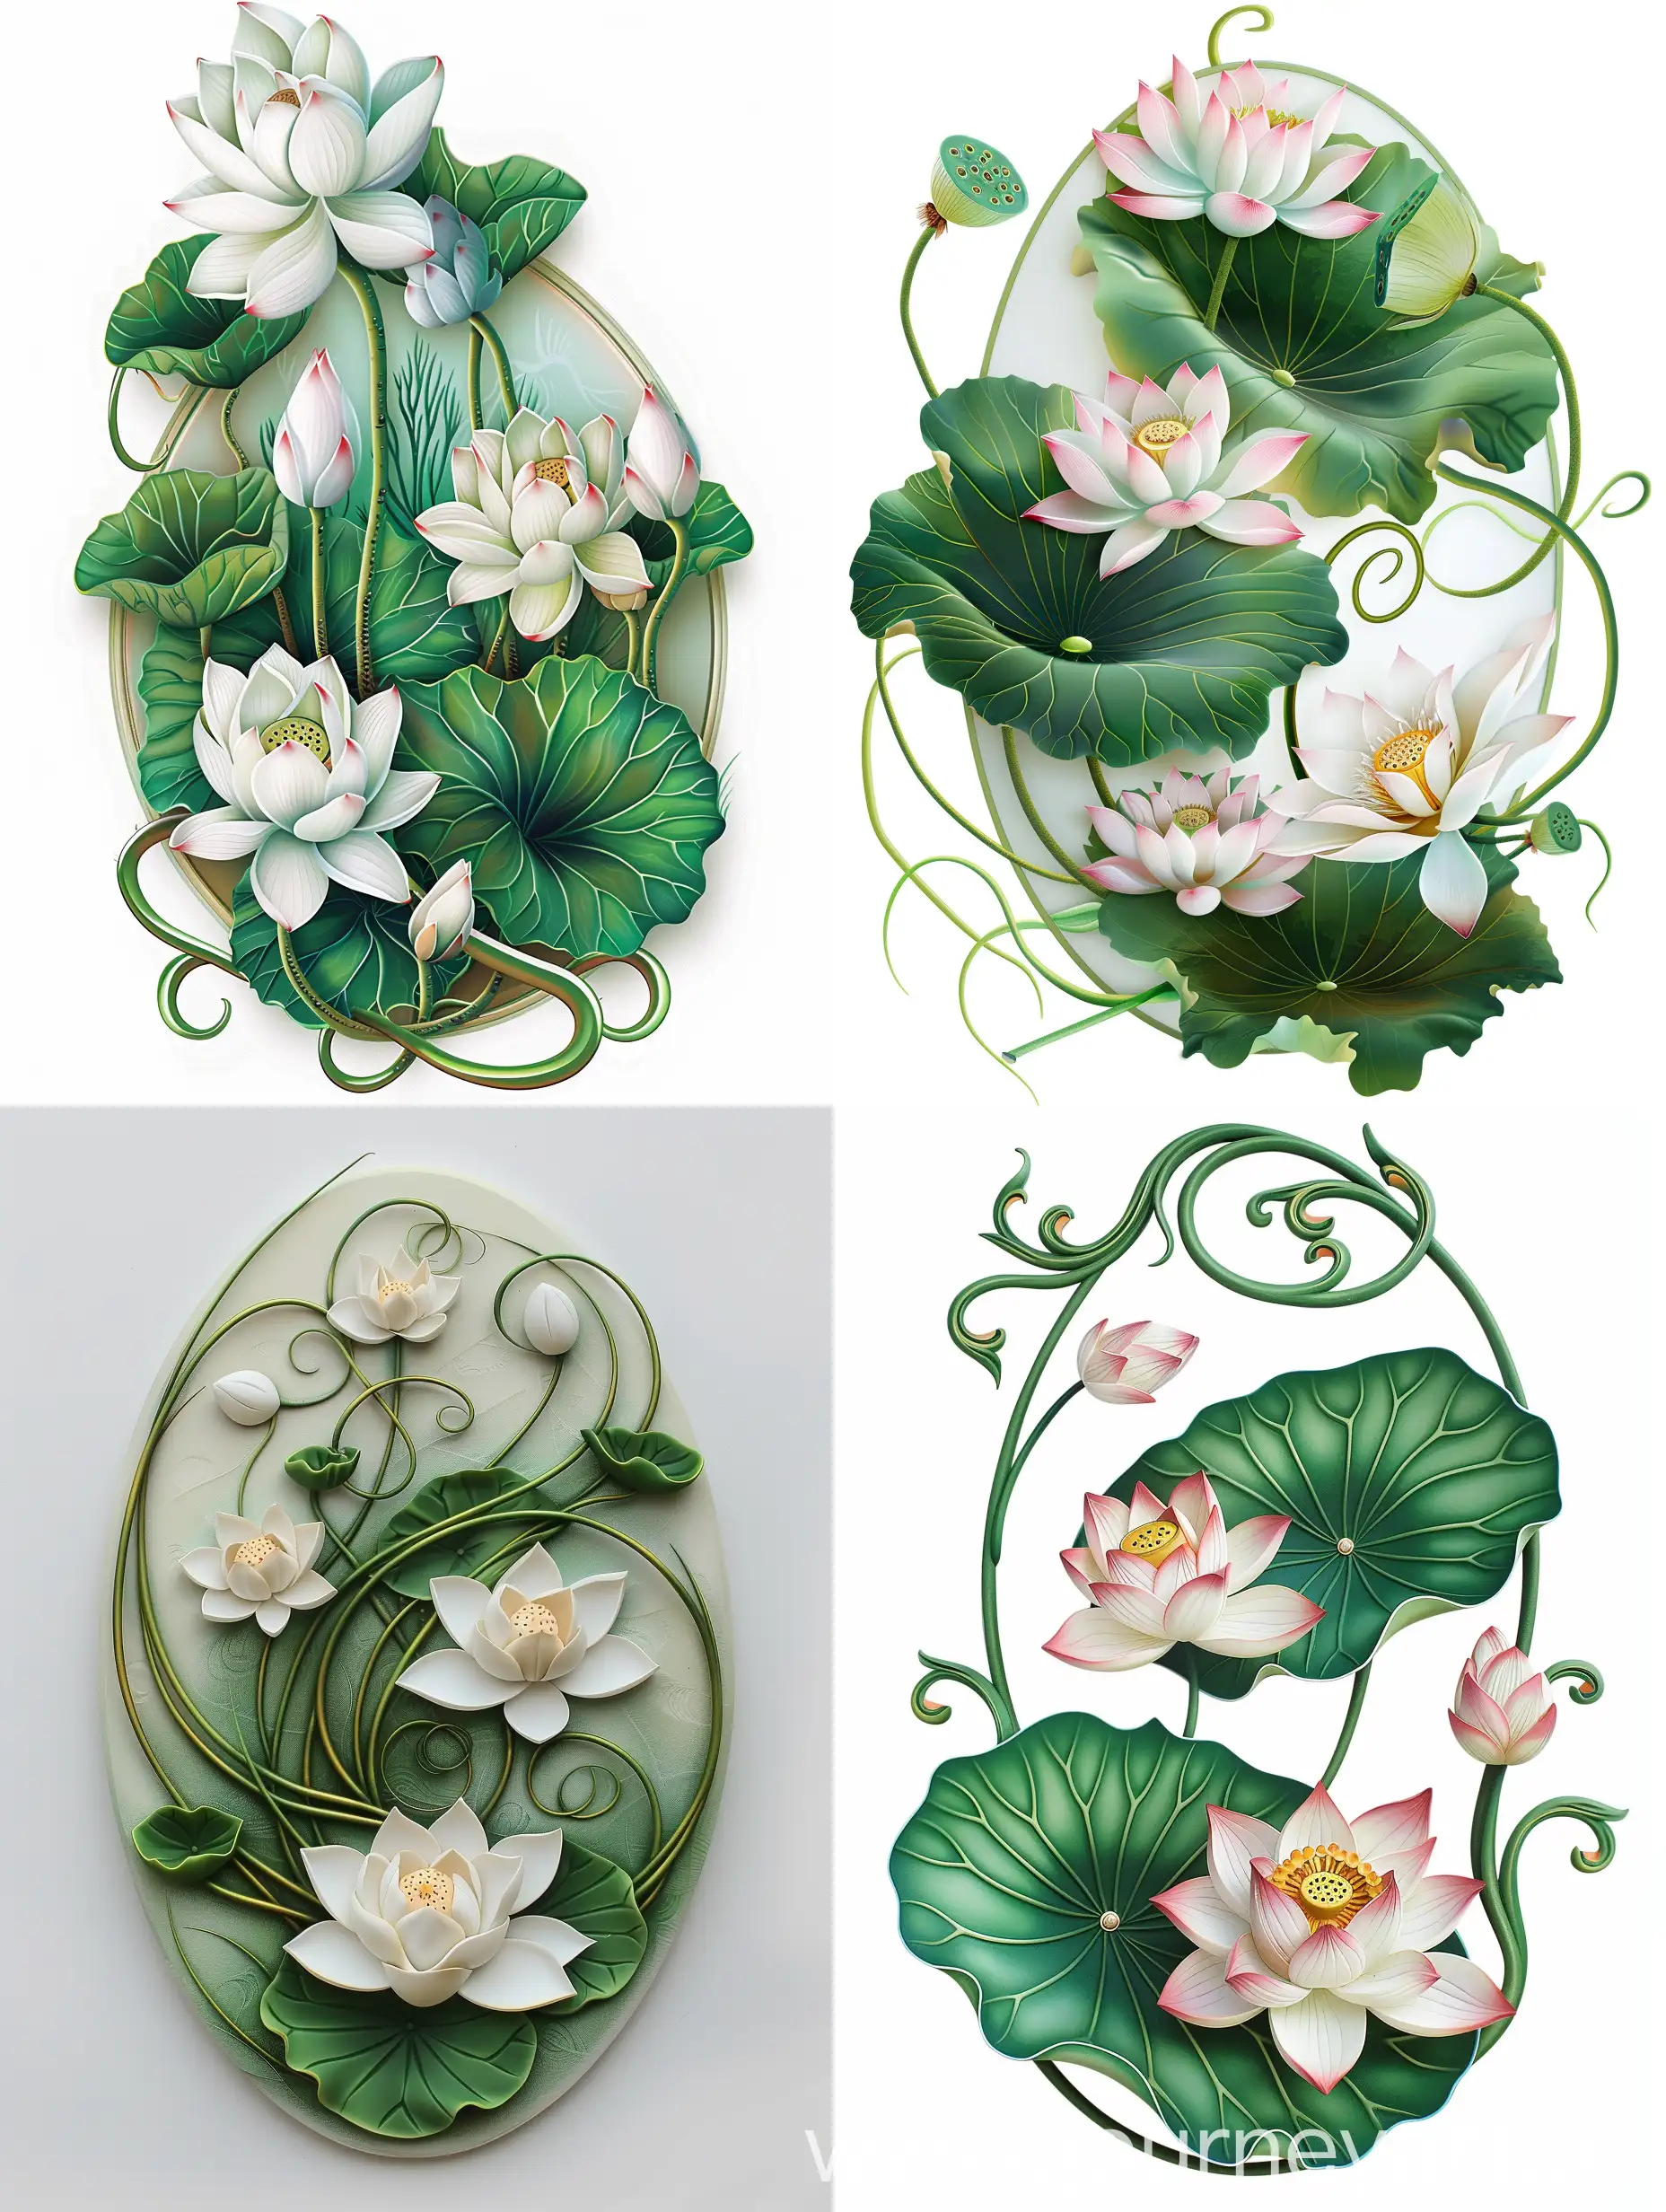 Lotus flowers, long thin green leaves forming a curly ornament, oval-shaped, three-dimensional style, on a white background